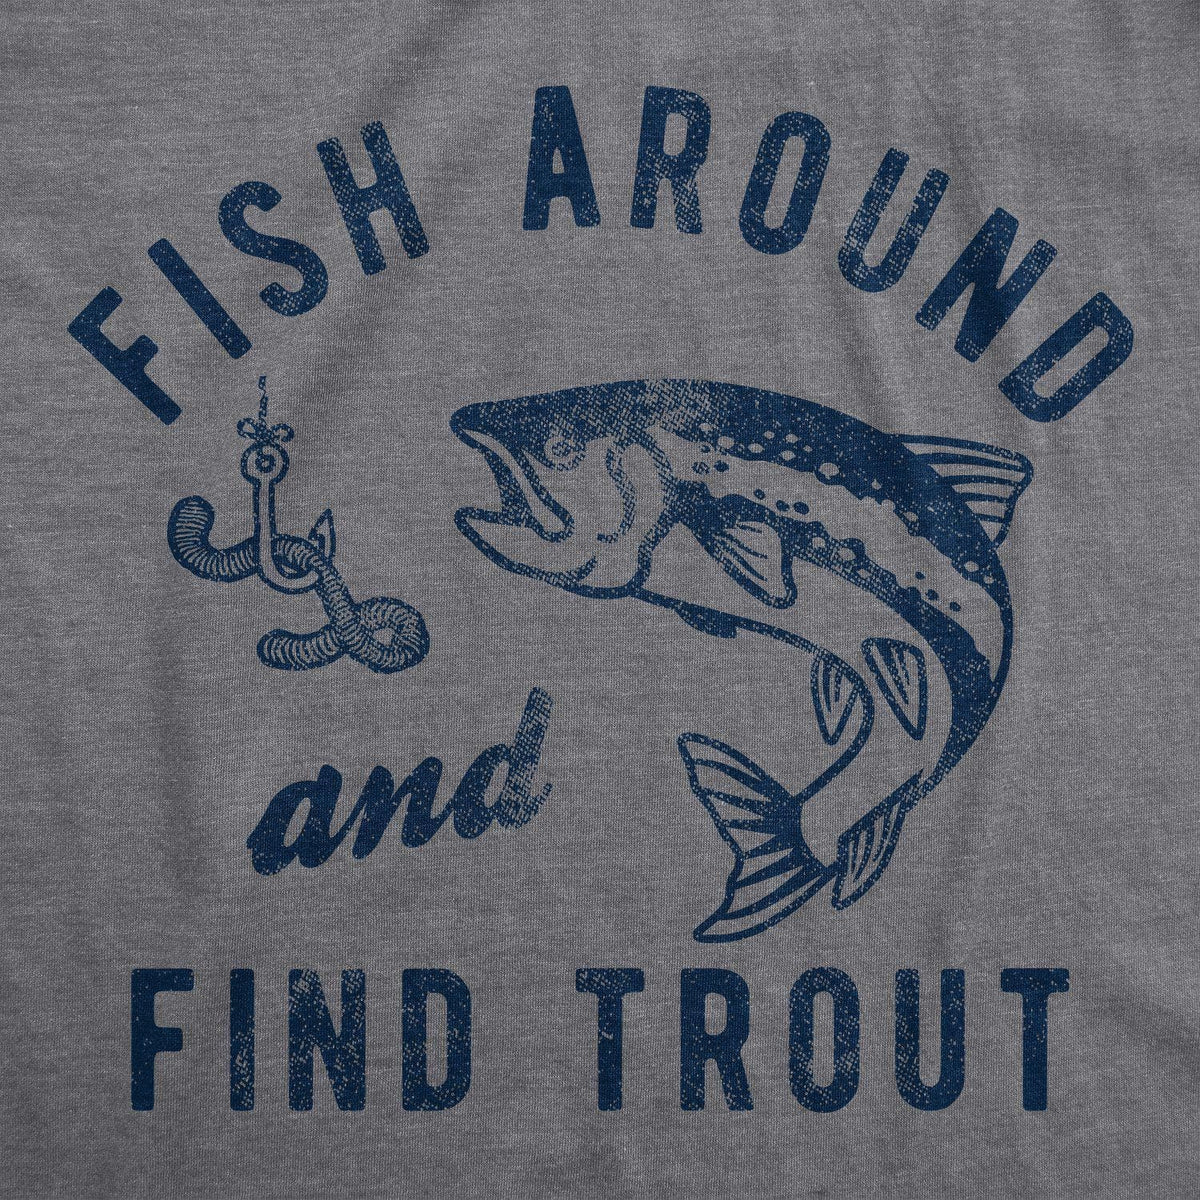 Fish Around And Find Trout Men&#39;s Tshirt - Crazy Dog T-Shirts